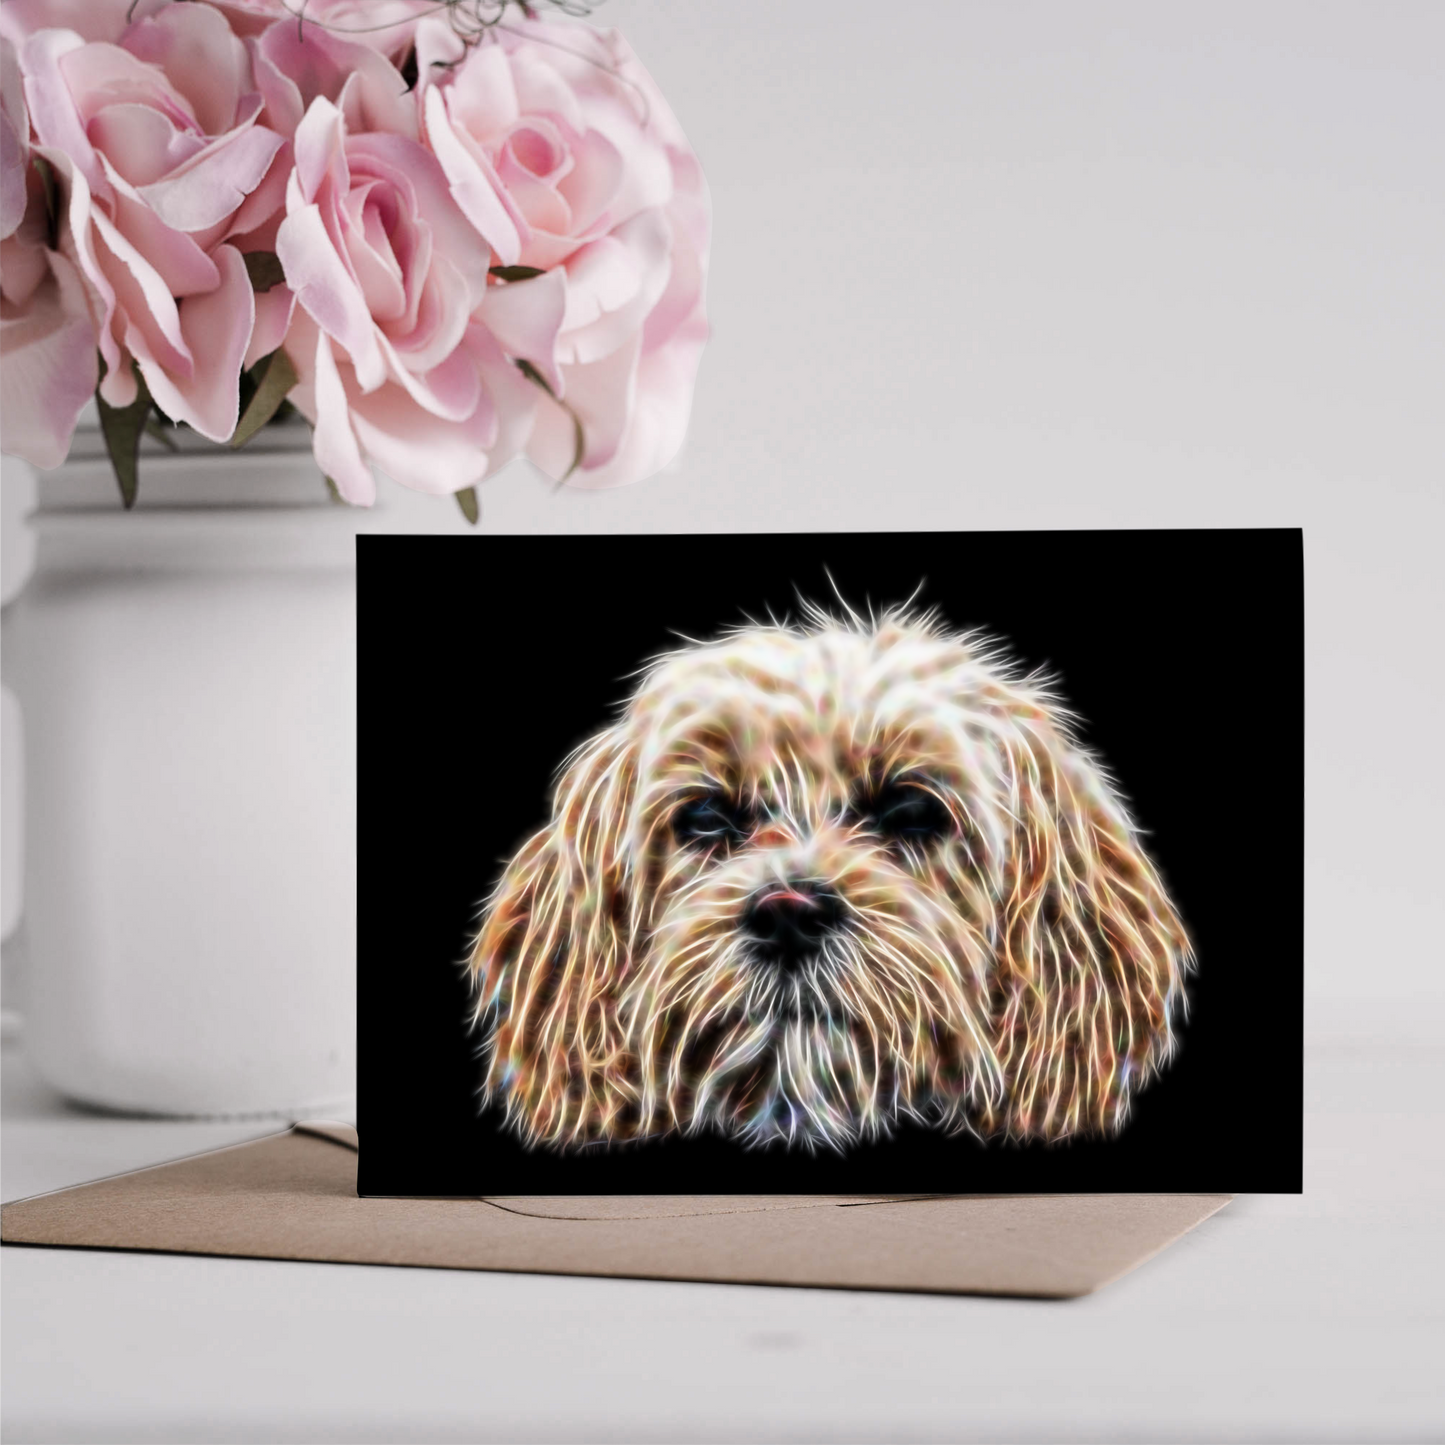 Cavachon Greeting Card Blank Inside for Birthdays or any other Occasion